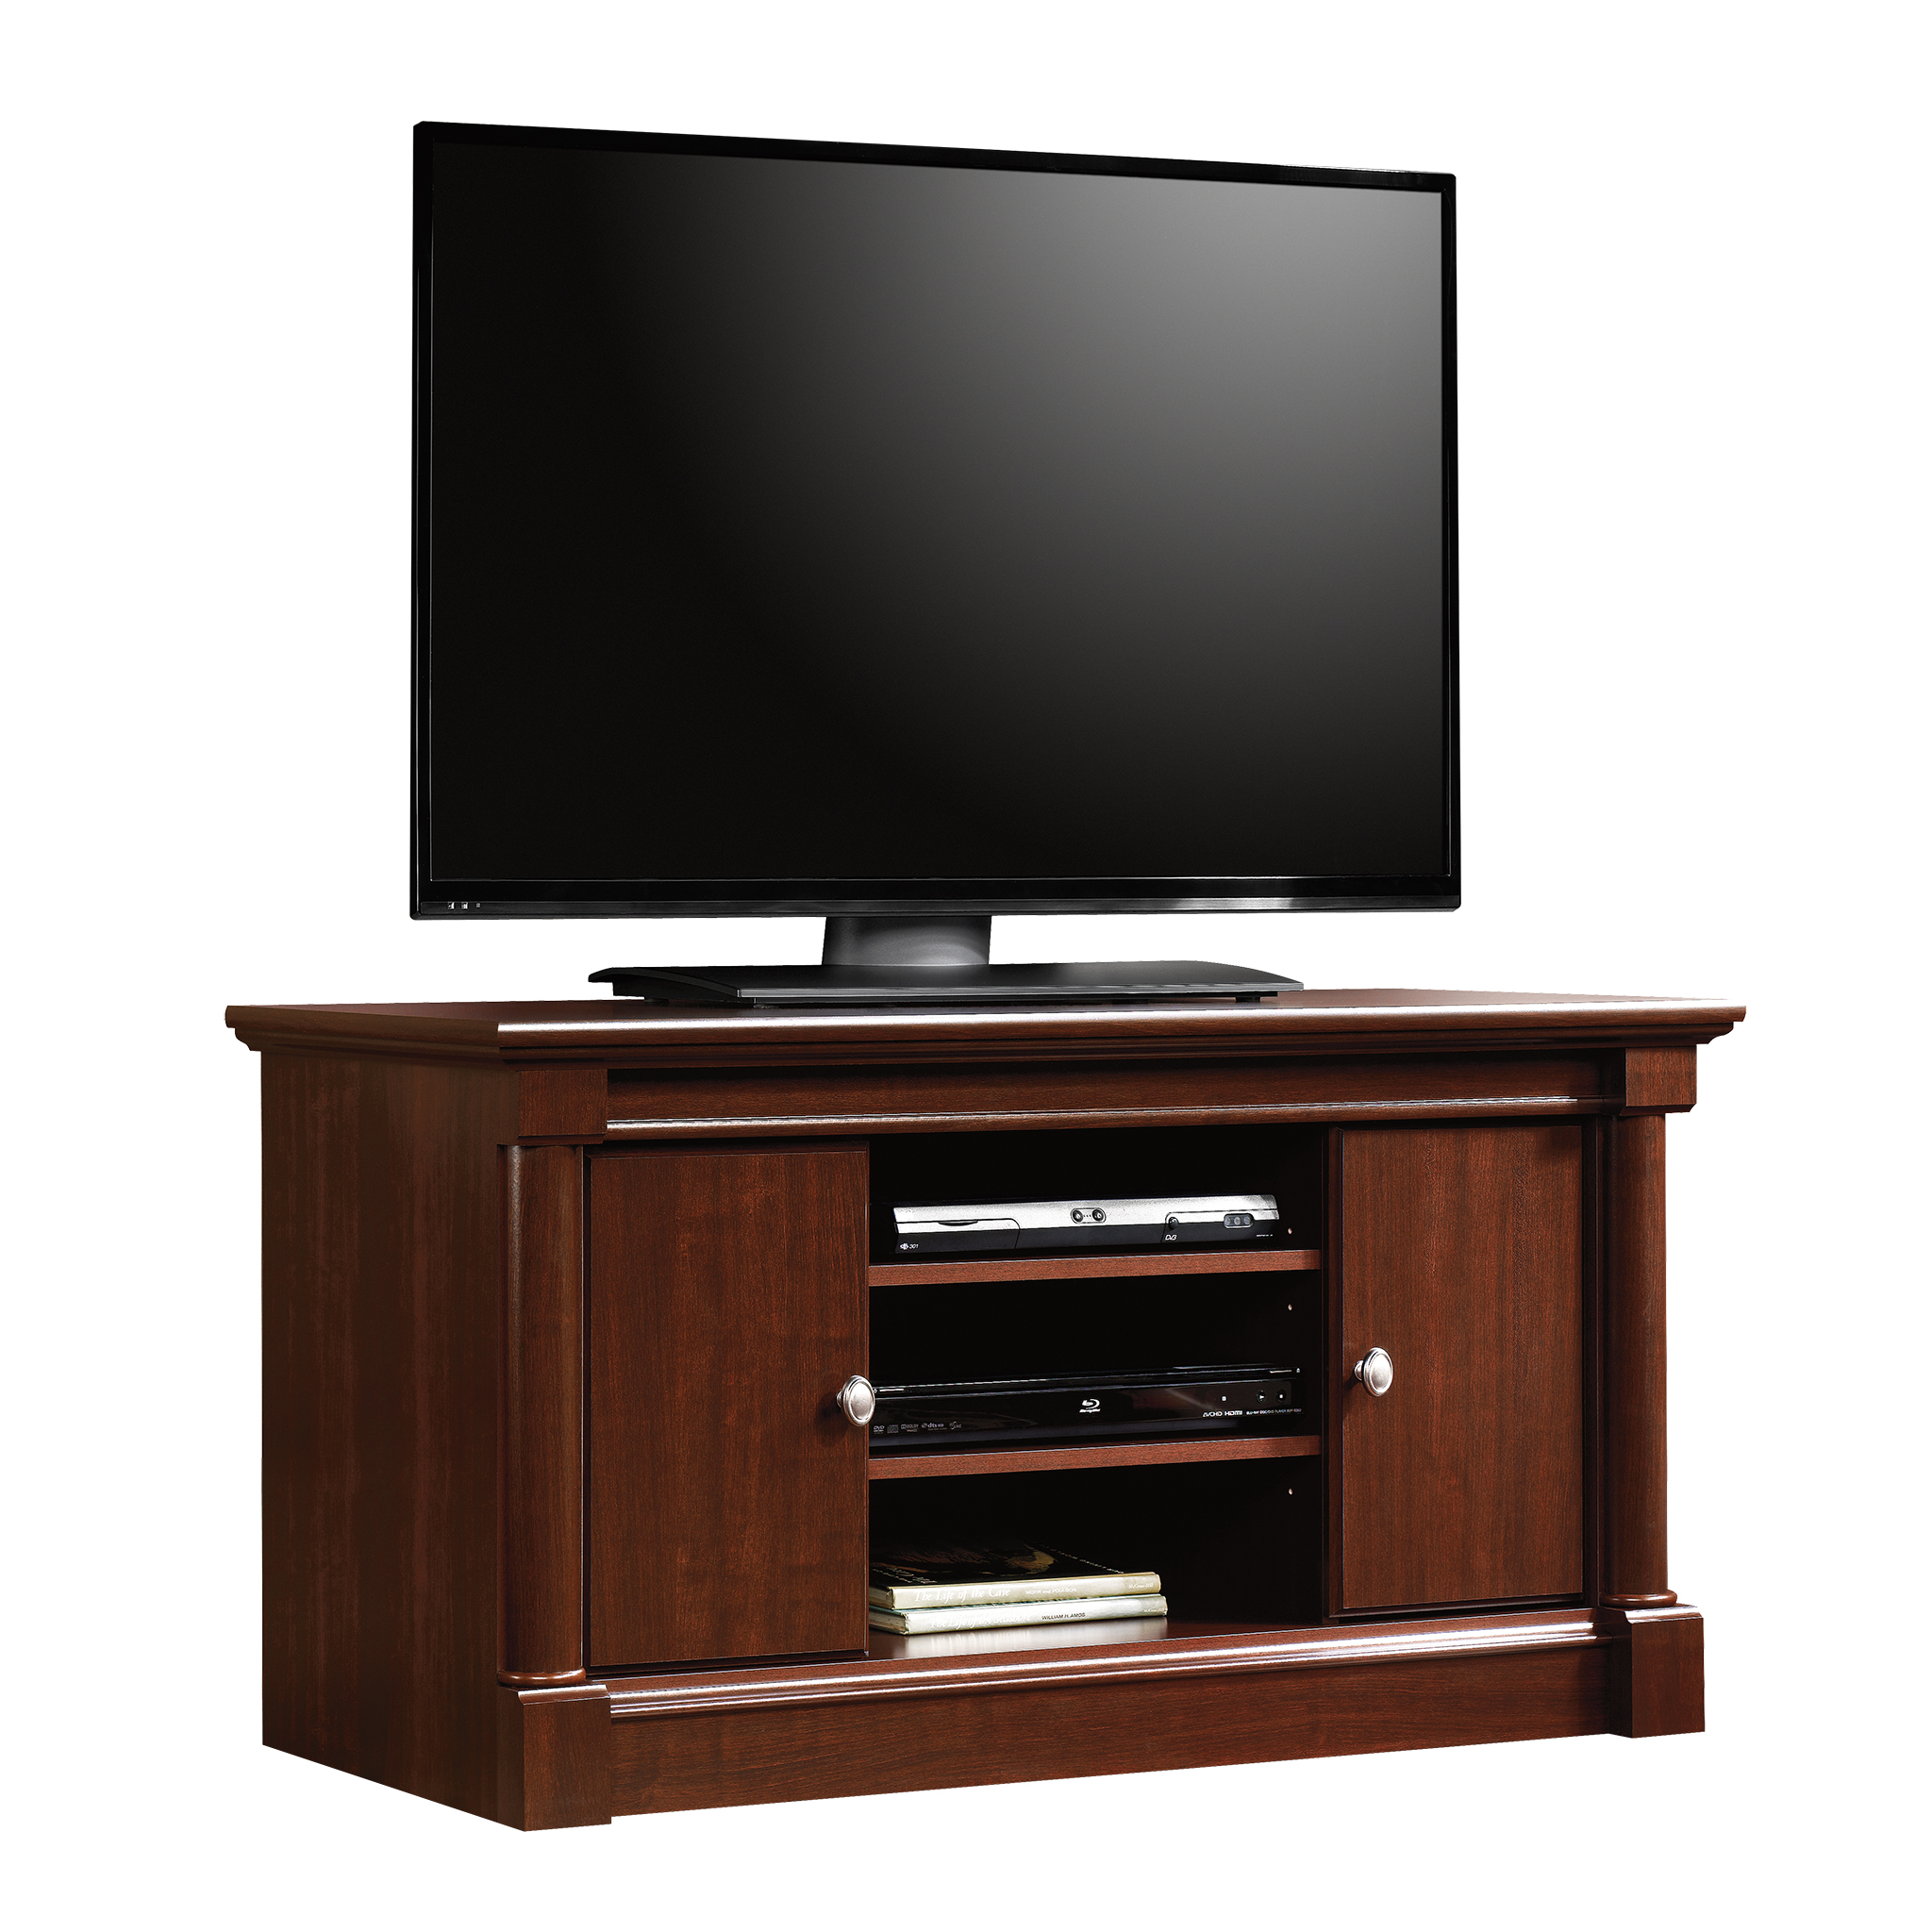 Sauder Palladia Panel TV Stand for TV's up to 50", Select Cherry Finish - image 1 of 4